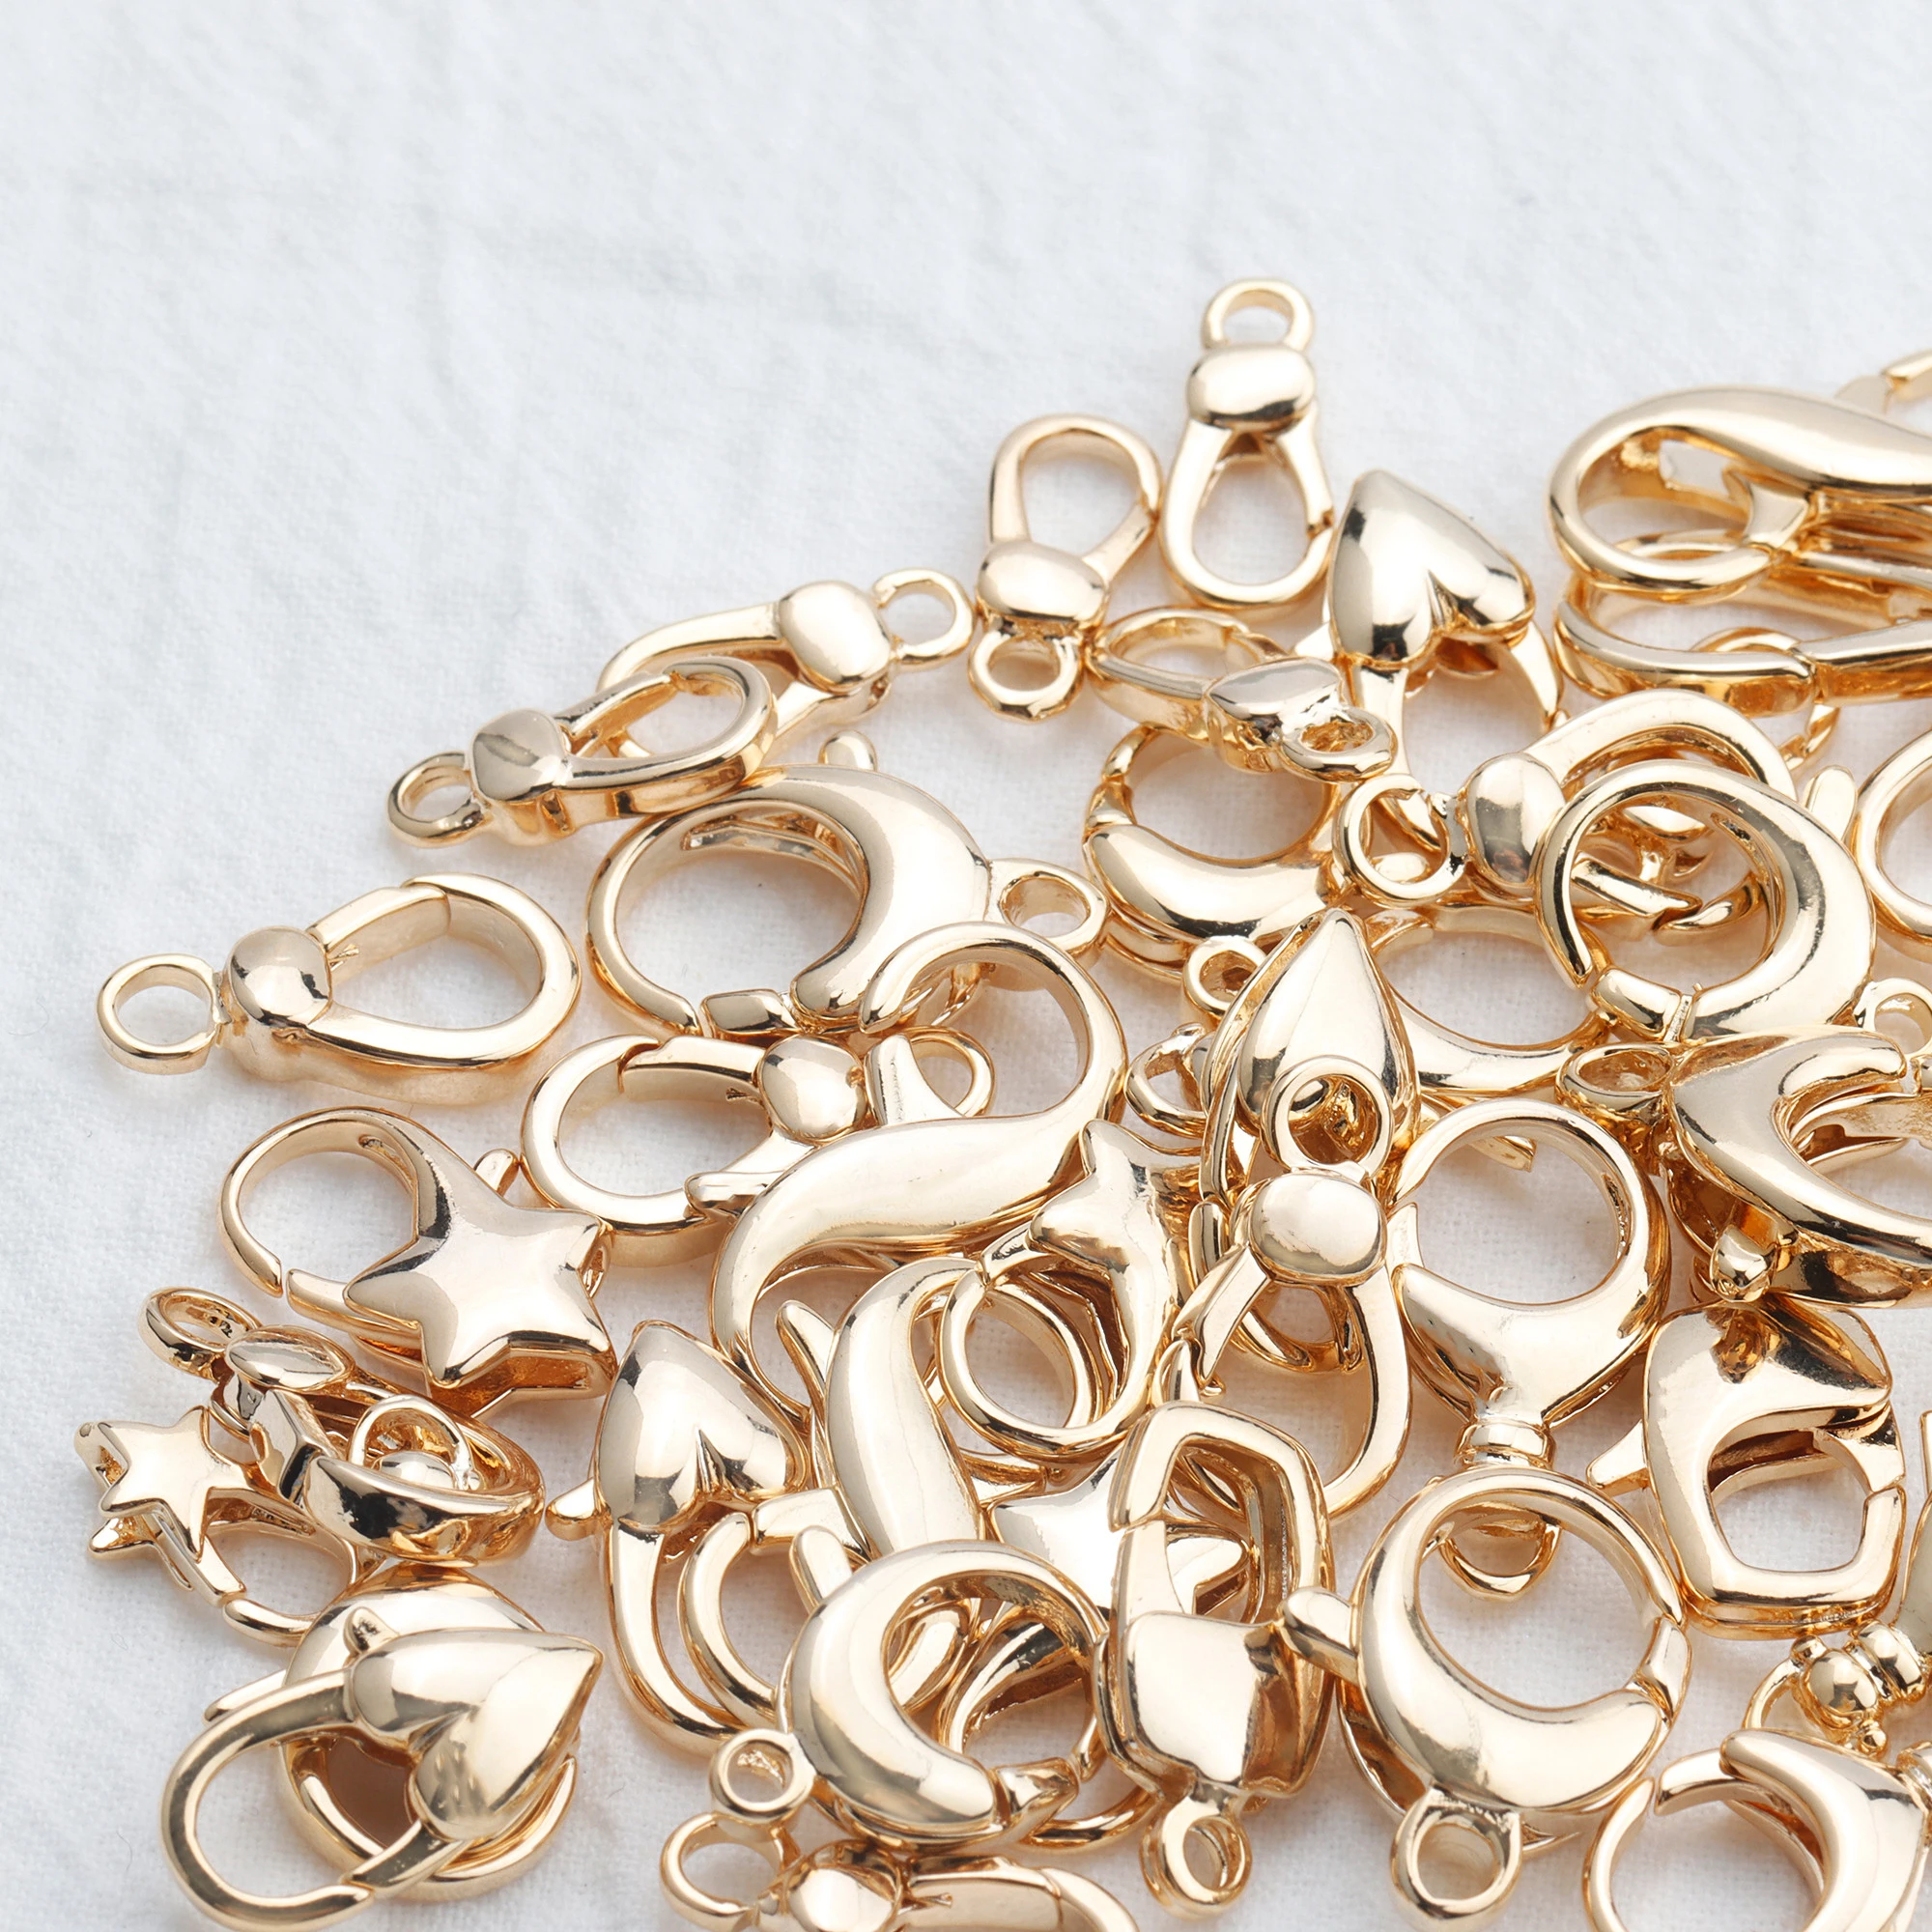 Wholesale high quality lobster clasp hooks 18K gold plated necklace bracelet jewelry making accessories,M824,10 pcs/lot